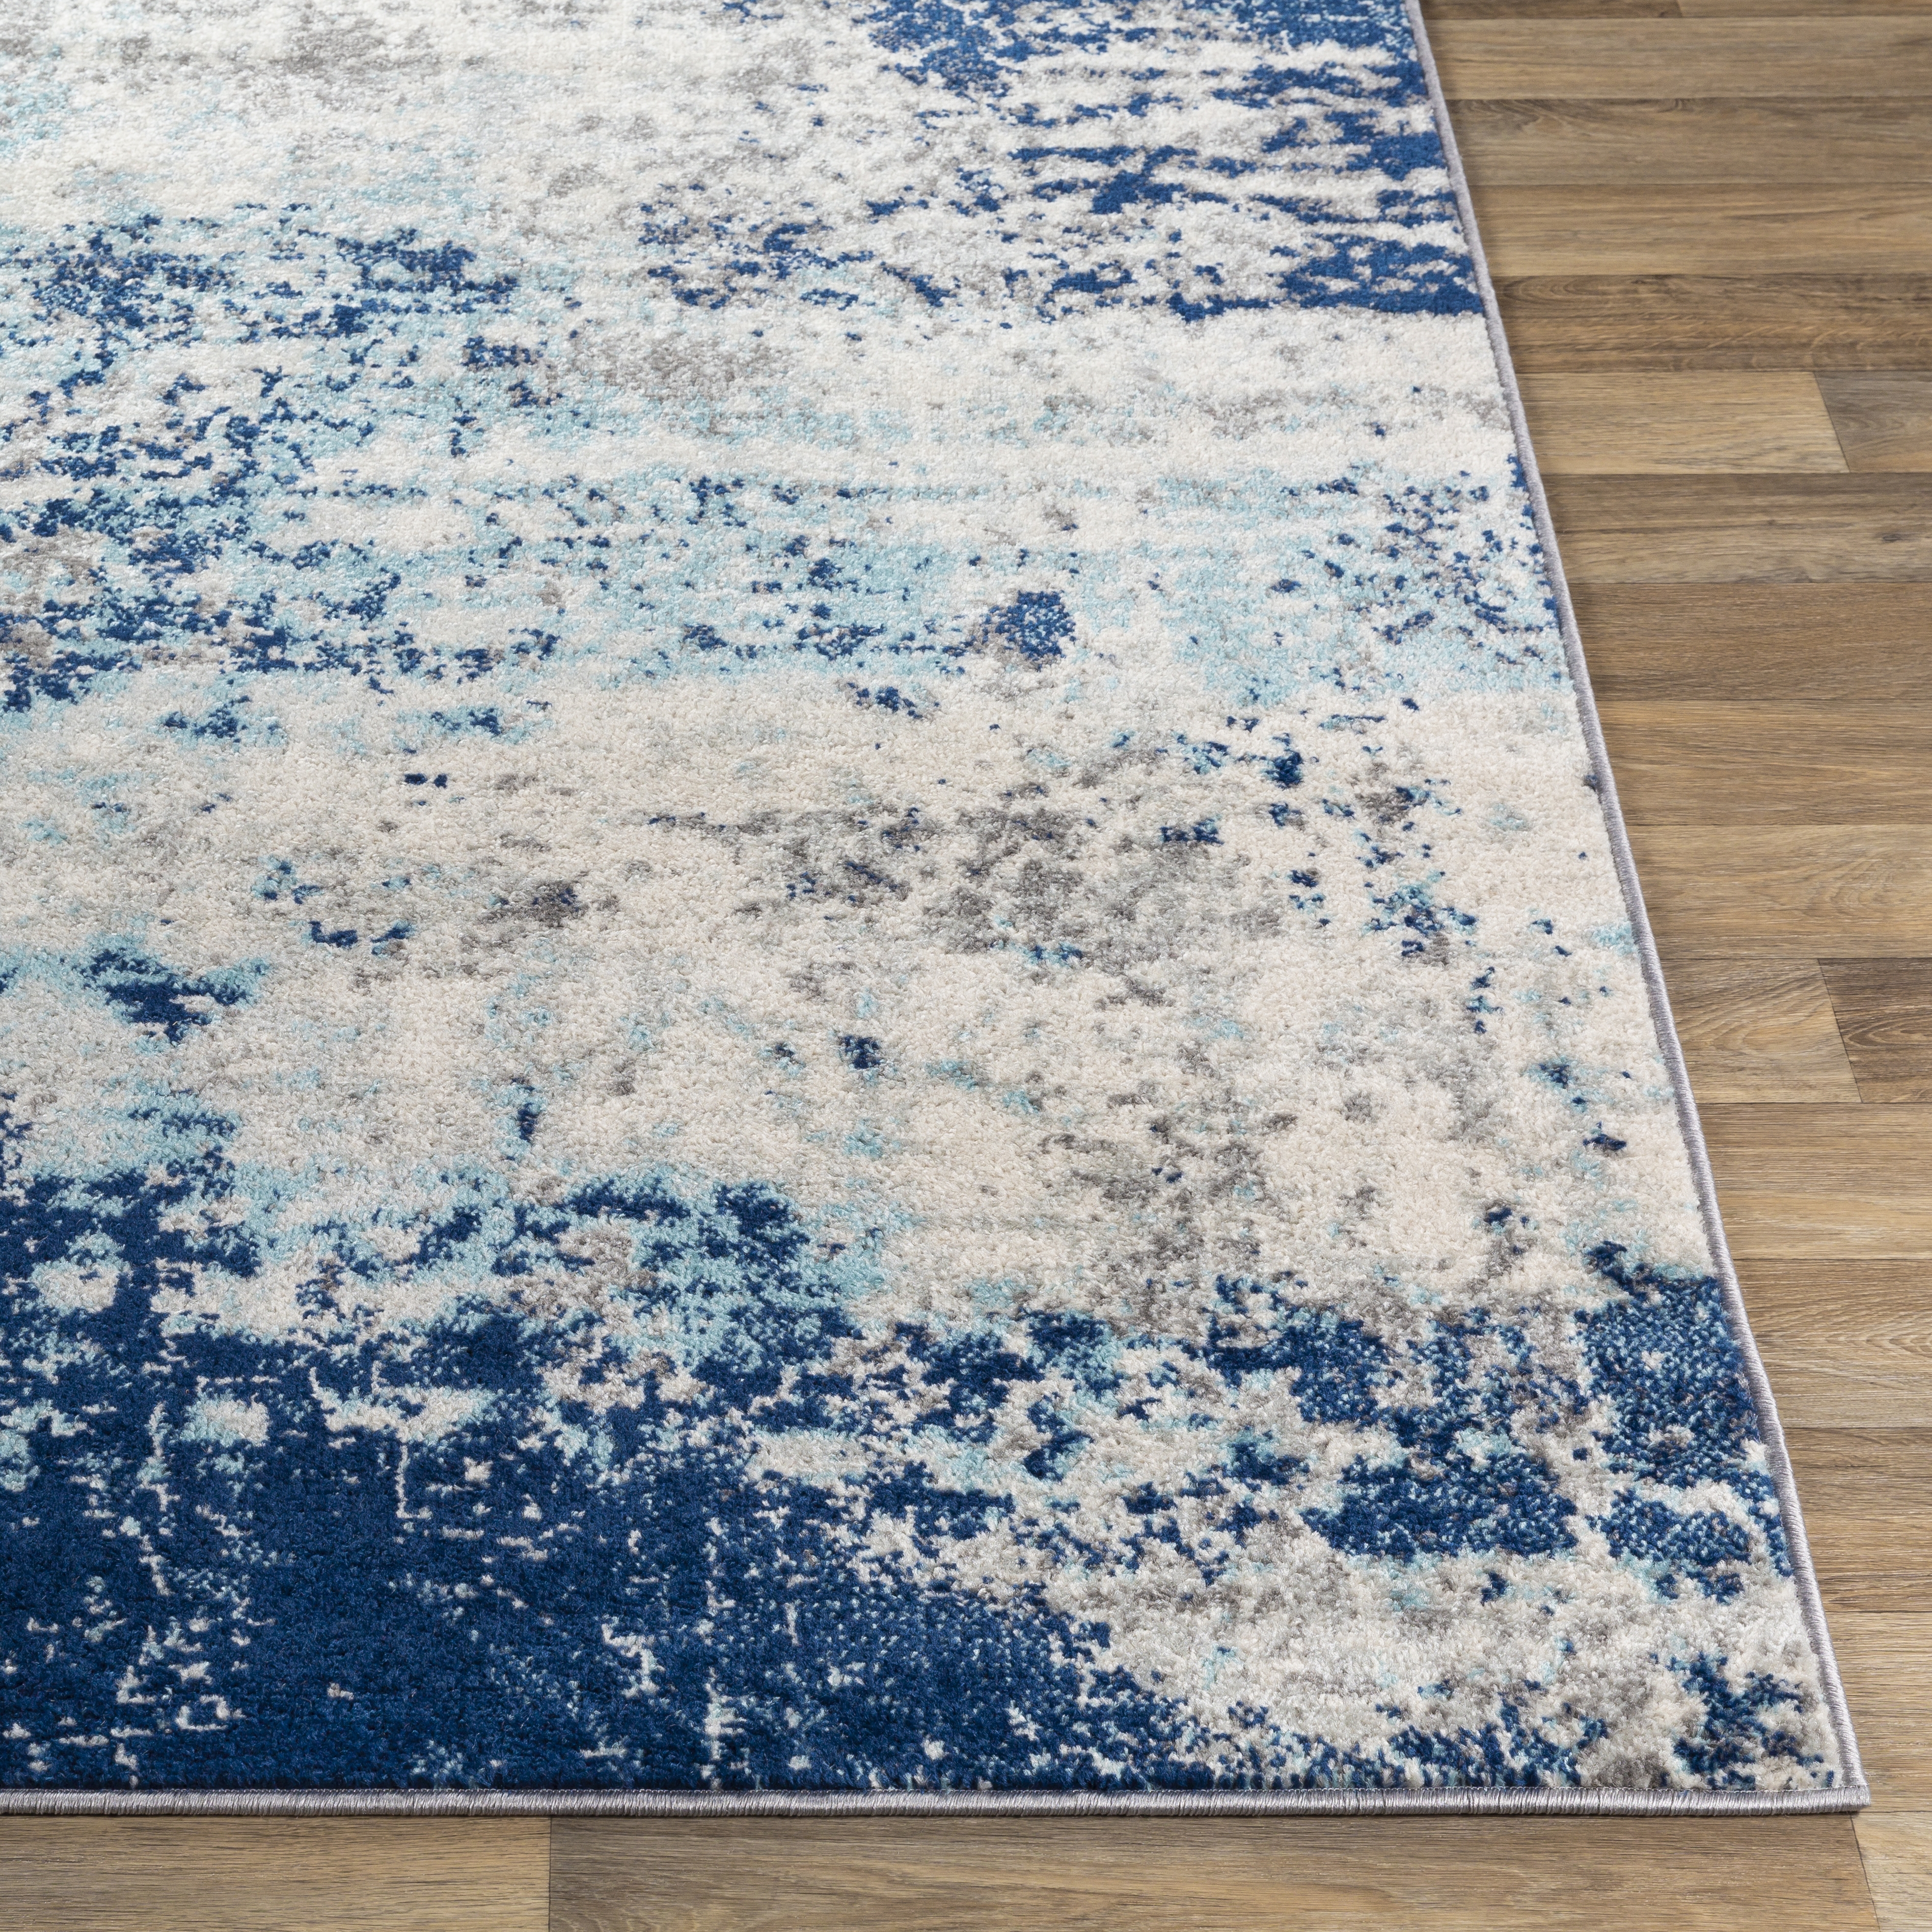 Chester Rug, 5'3" x 7'3" - Image 2